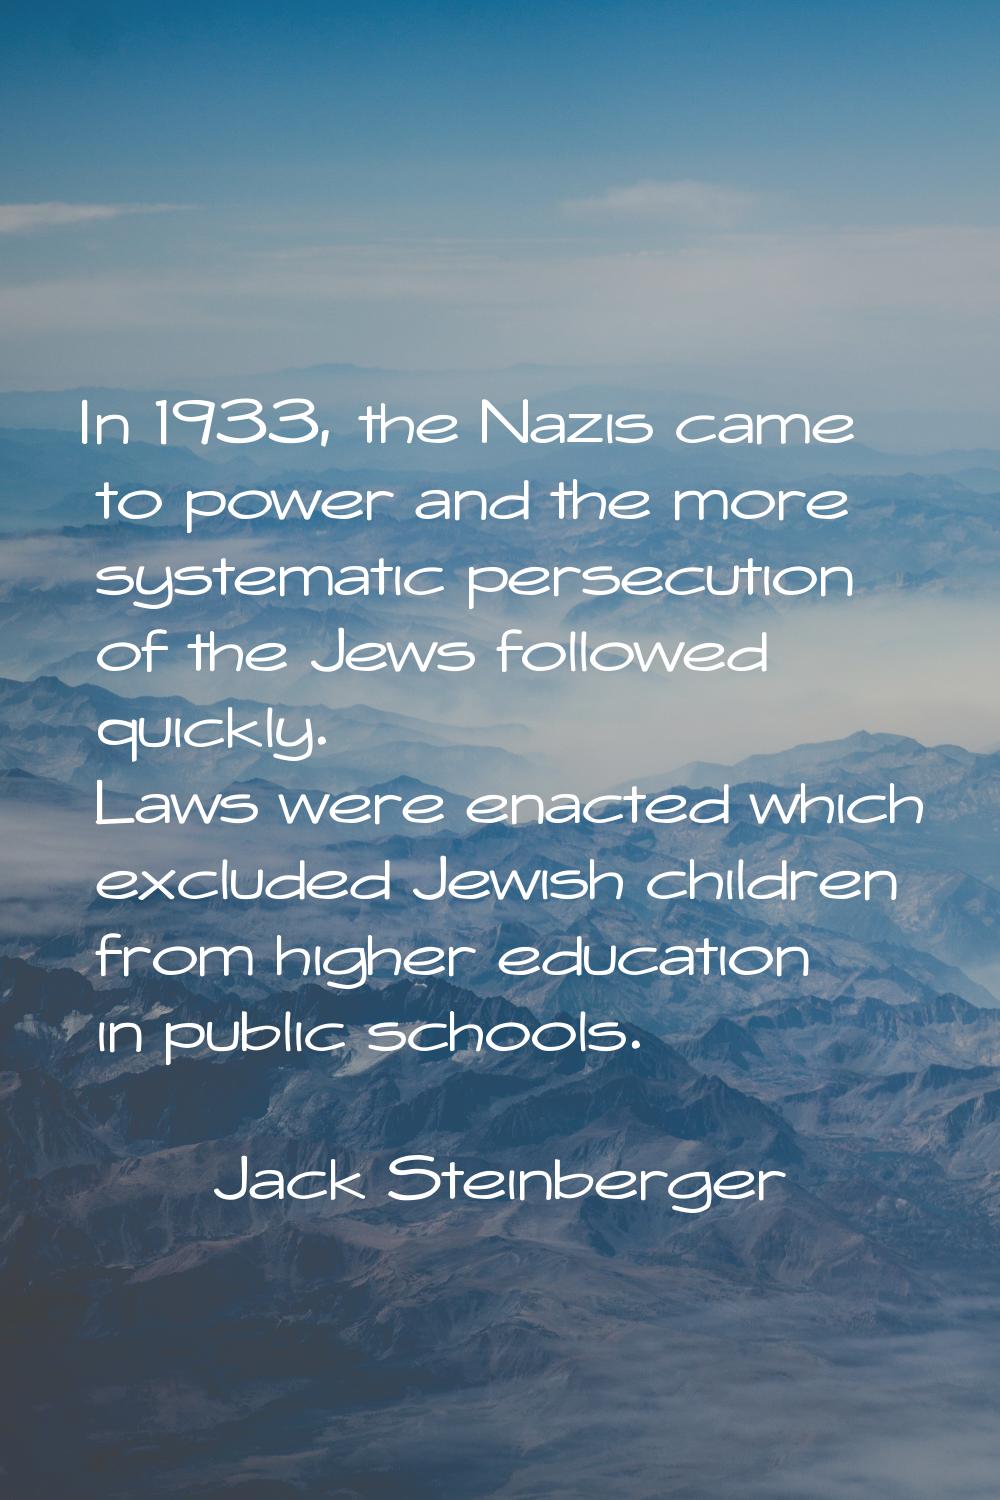 In 1933, the Nazis came to power and the more systematic persecution of the Jews followed quickly. 